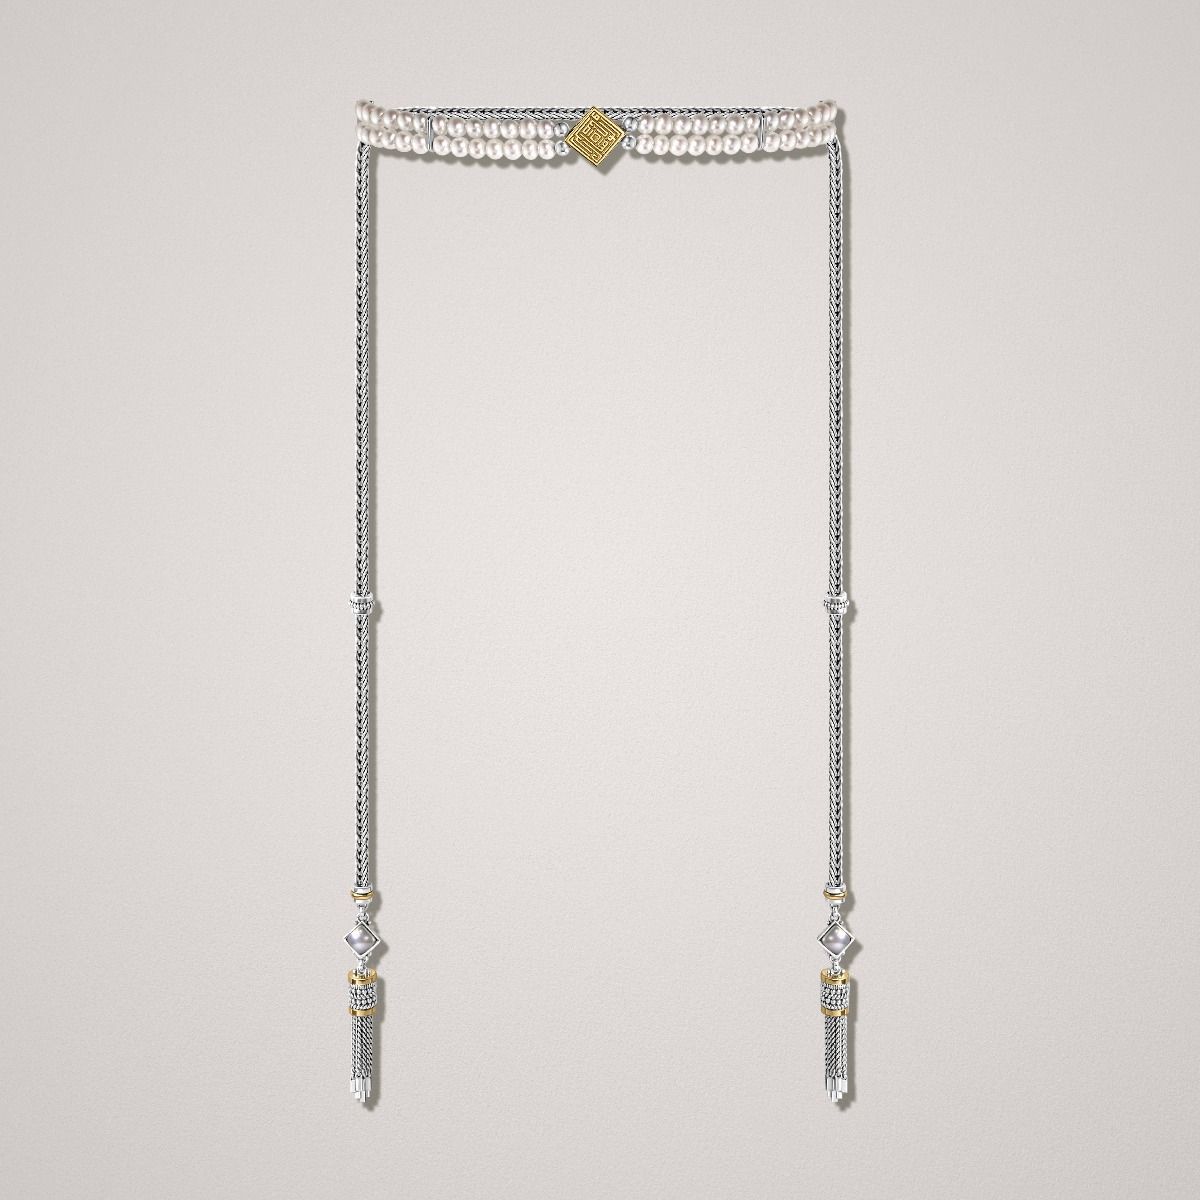 Wrap-Around Kufi Necklace by Azza Fahmy - Pearls - Designer Necklaces